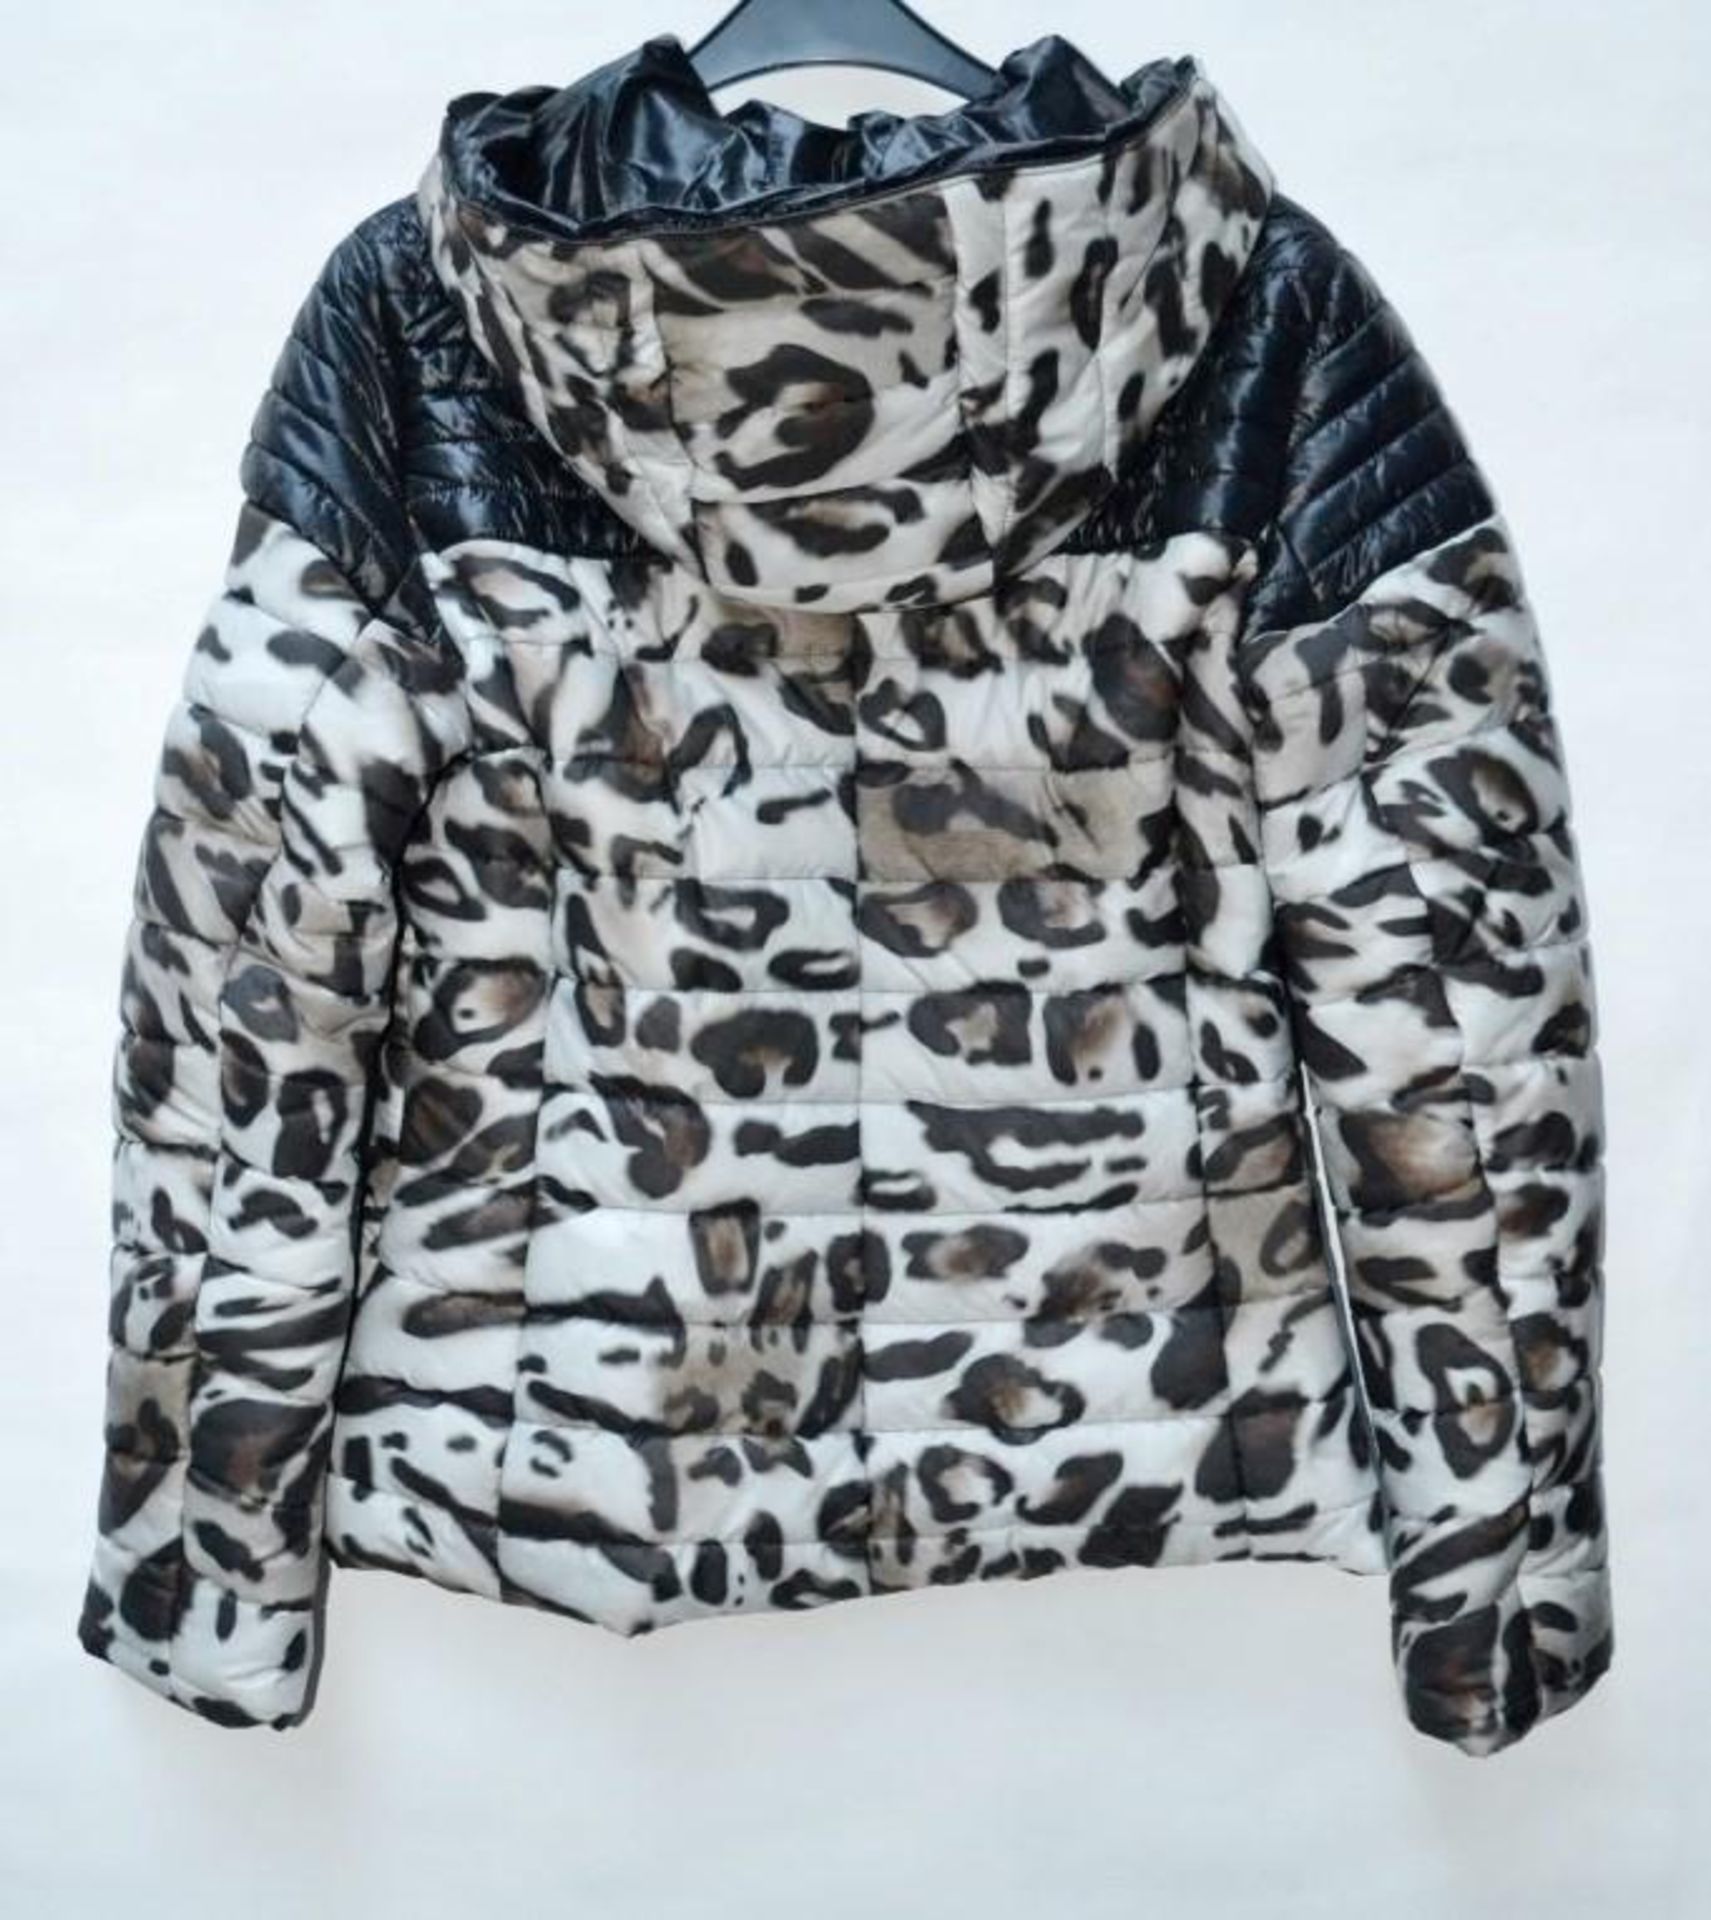 1 x Steilmann Kirsten Womens Hooded Winter Coat - Poly Down Padded, In Leopard Print - Size 12 - CL2 - Image 3 of 5